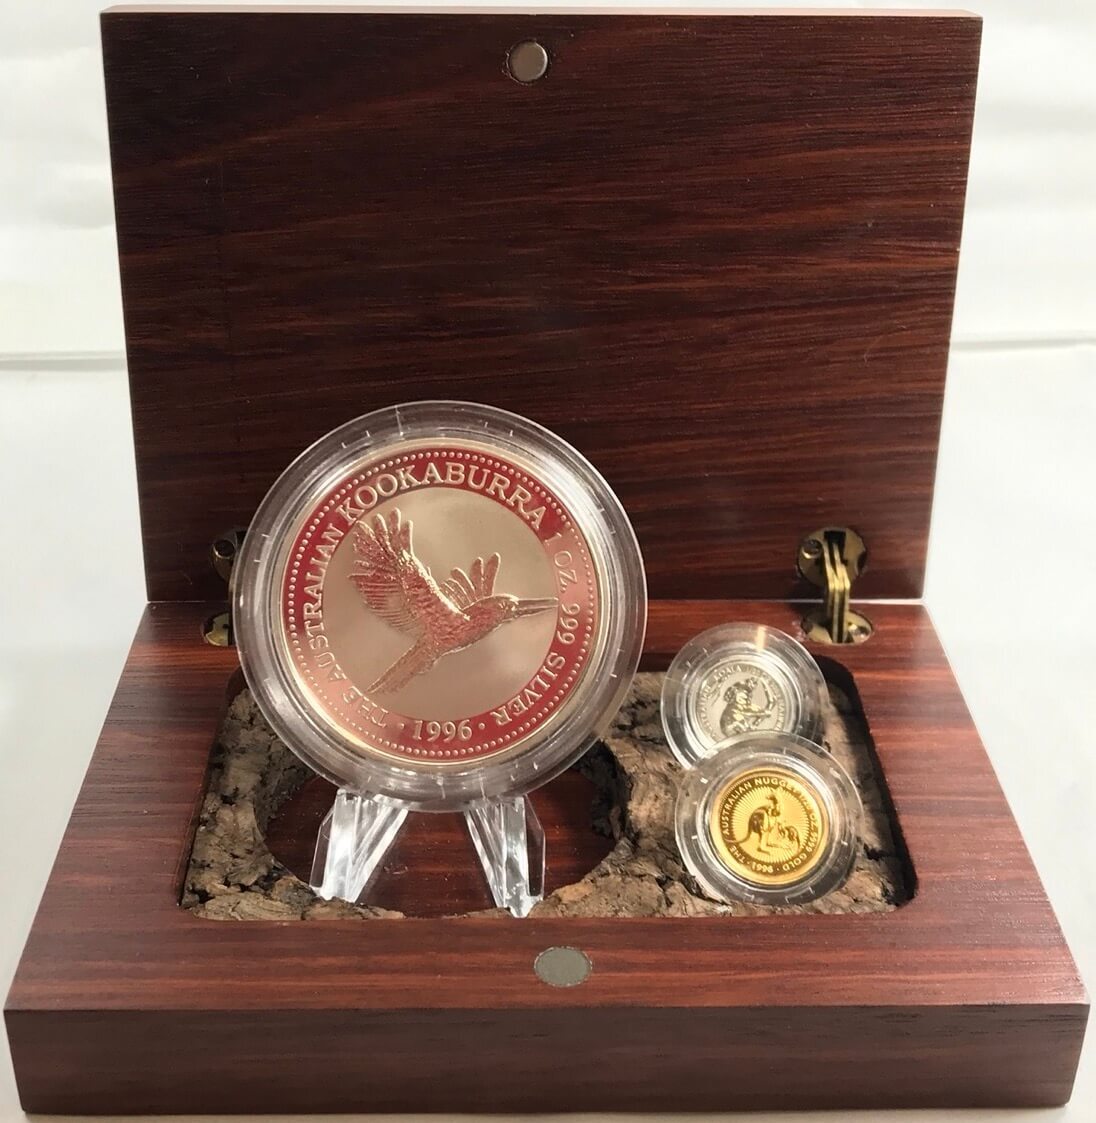 1996 Gold Platinum Silver Family of Precious Metals Unc Coin Set product image